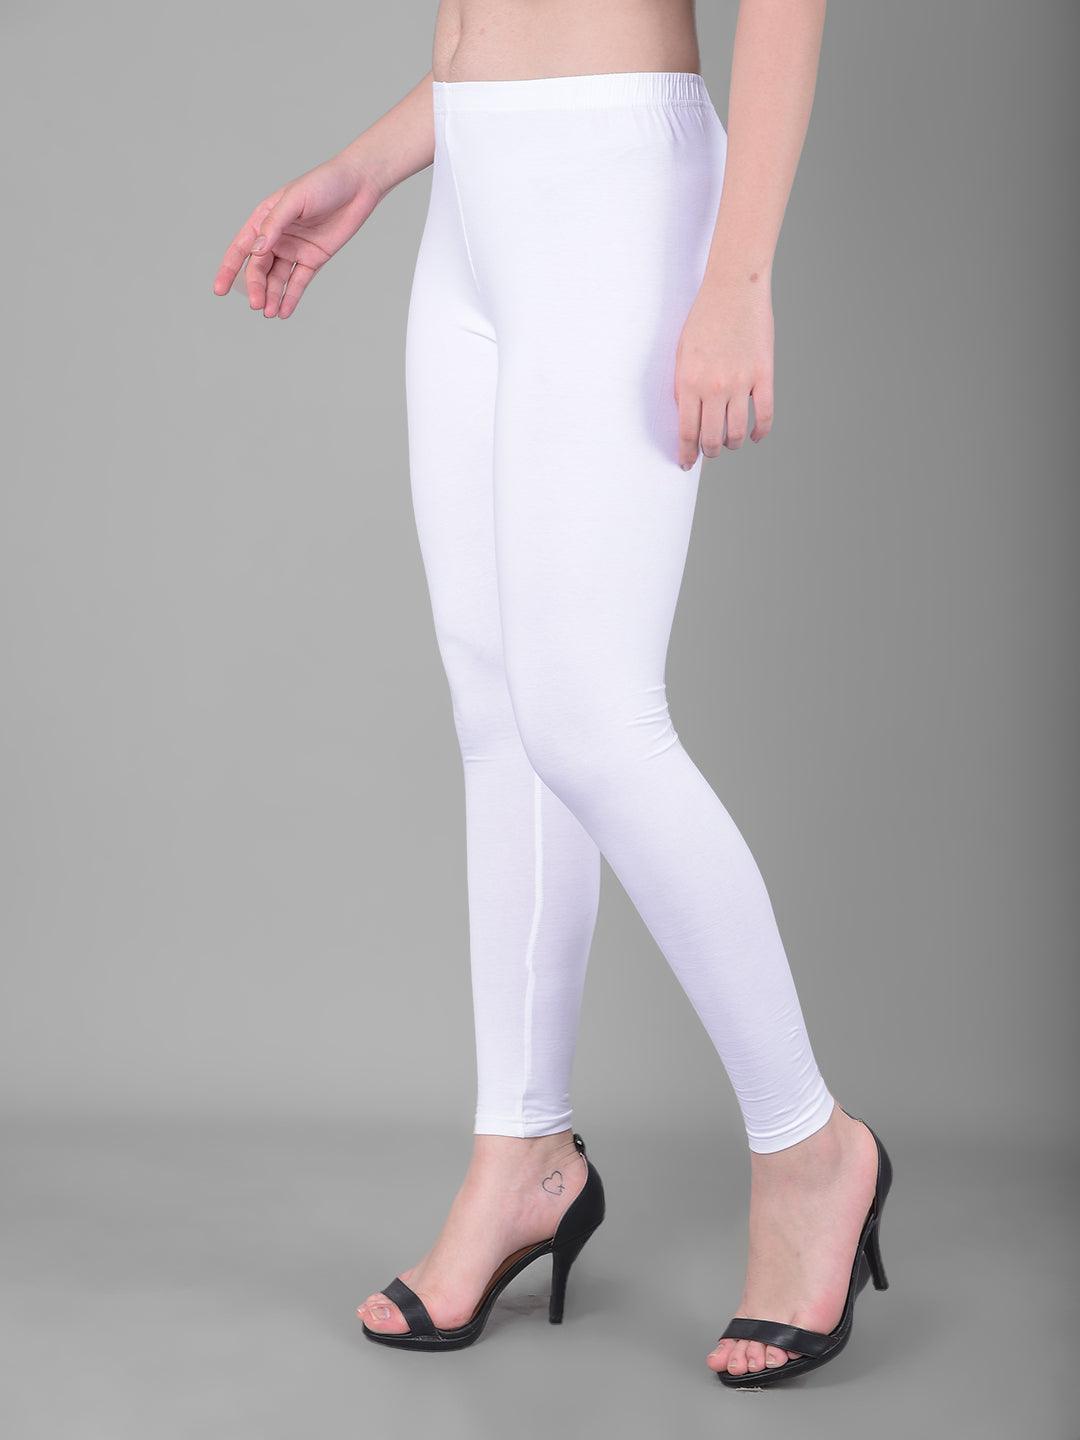 Buy VALLES365 by S.C. Ankle Length Leggings Set of 2 (White & Black) at  Amazon.in